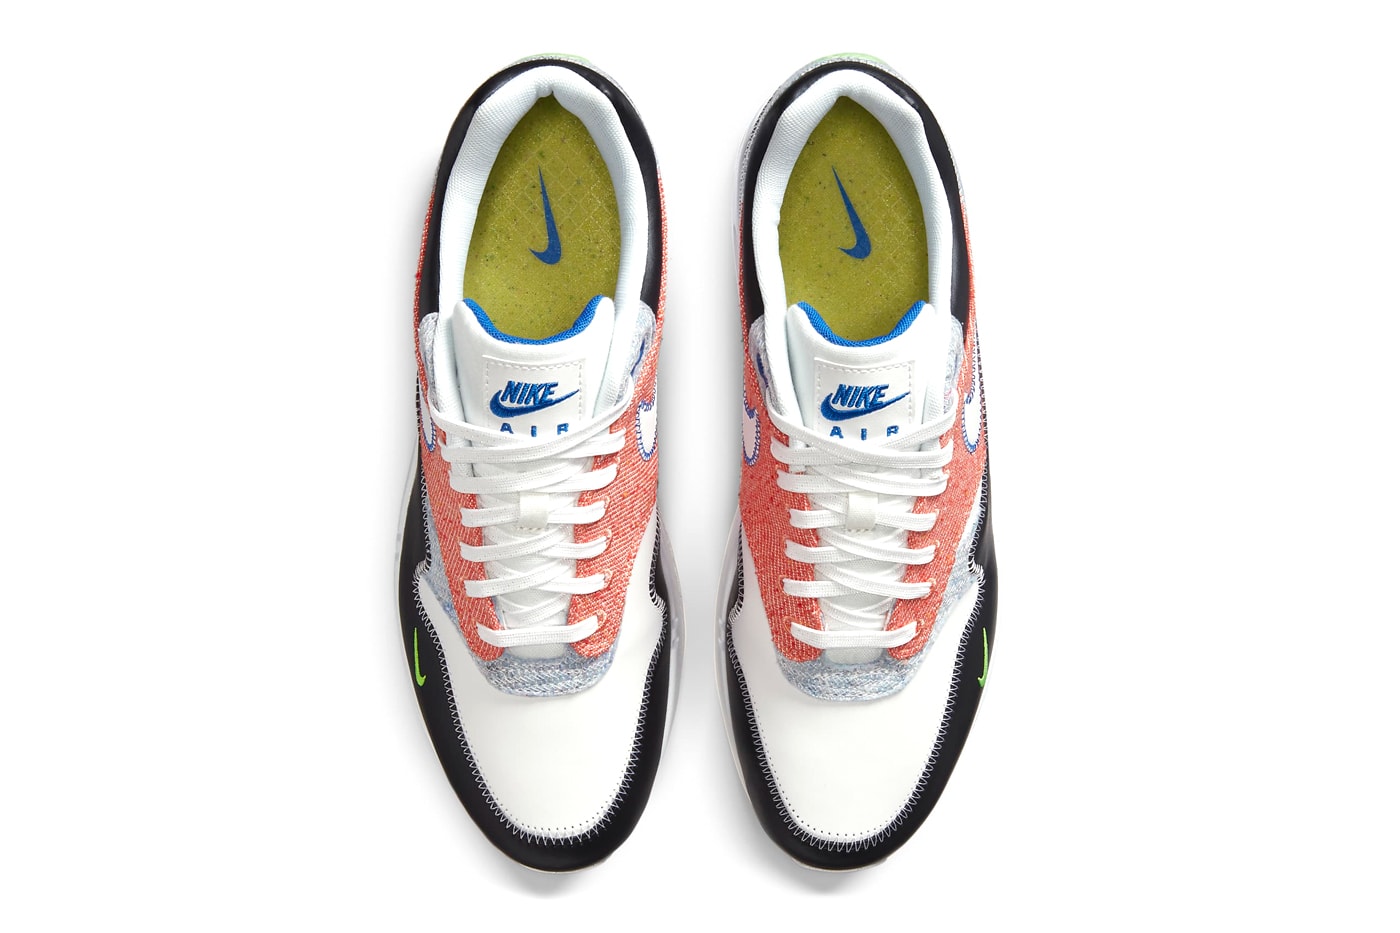 Nike Air Max 1 Game Royal White Black Electric Green CT1643 100 release menswear streetwear shoes sneakers footwear kicks trainers runners fw20 fall winter 2020 collection